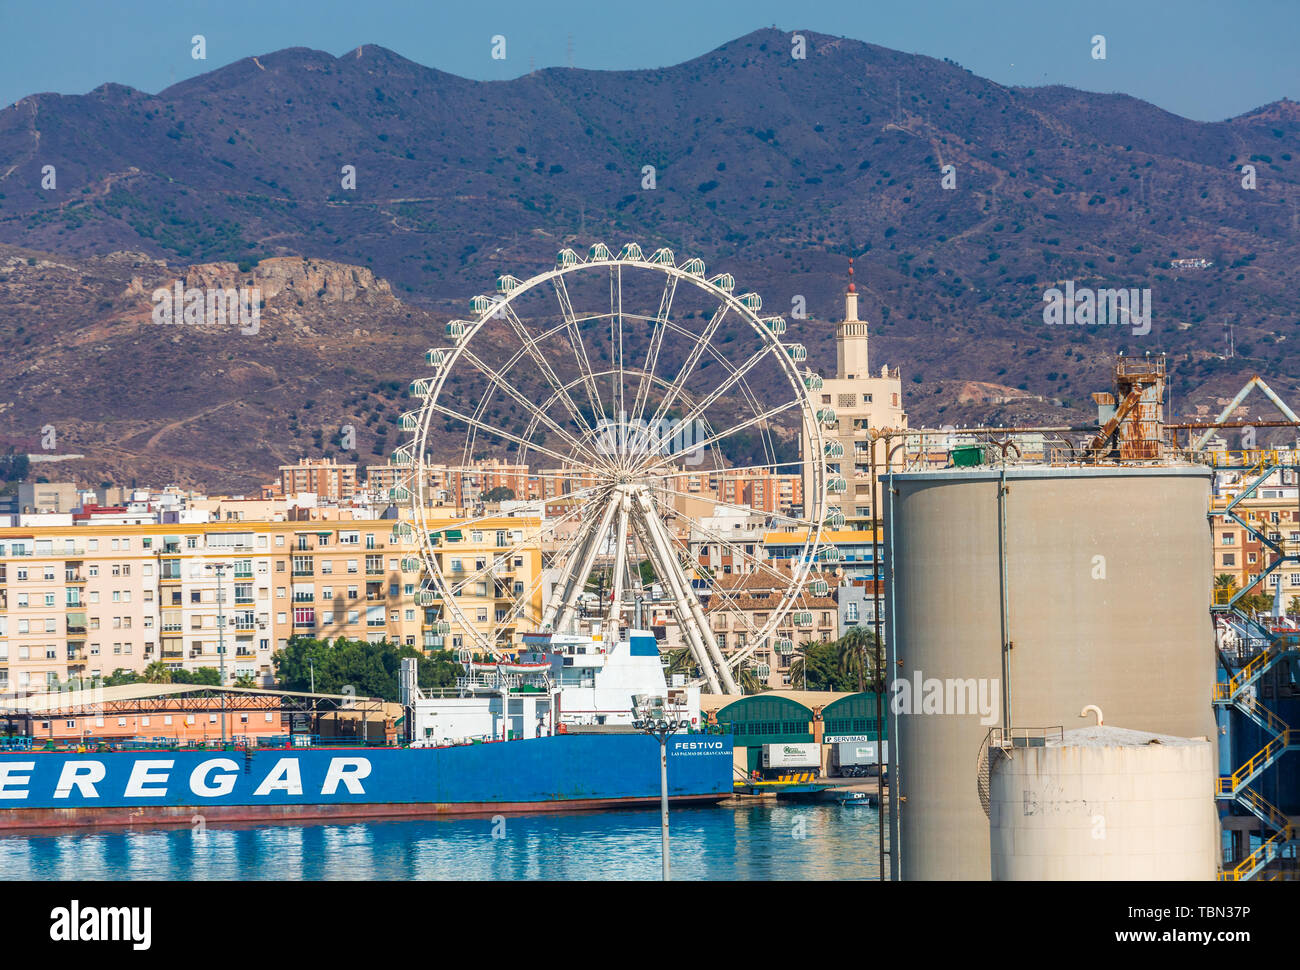 MALAGA, SPAIN - September 26, 2016: M laga is on Spain s Costa del Sol, known for its high-rise resorts, two hilltop citadels, the Alcazaba and ruined Stock Photo